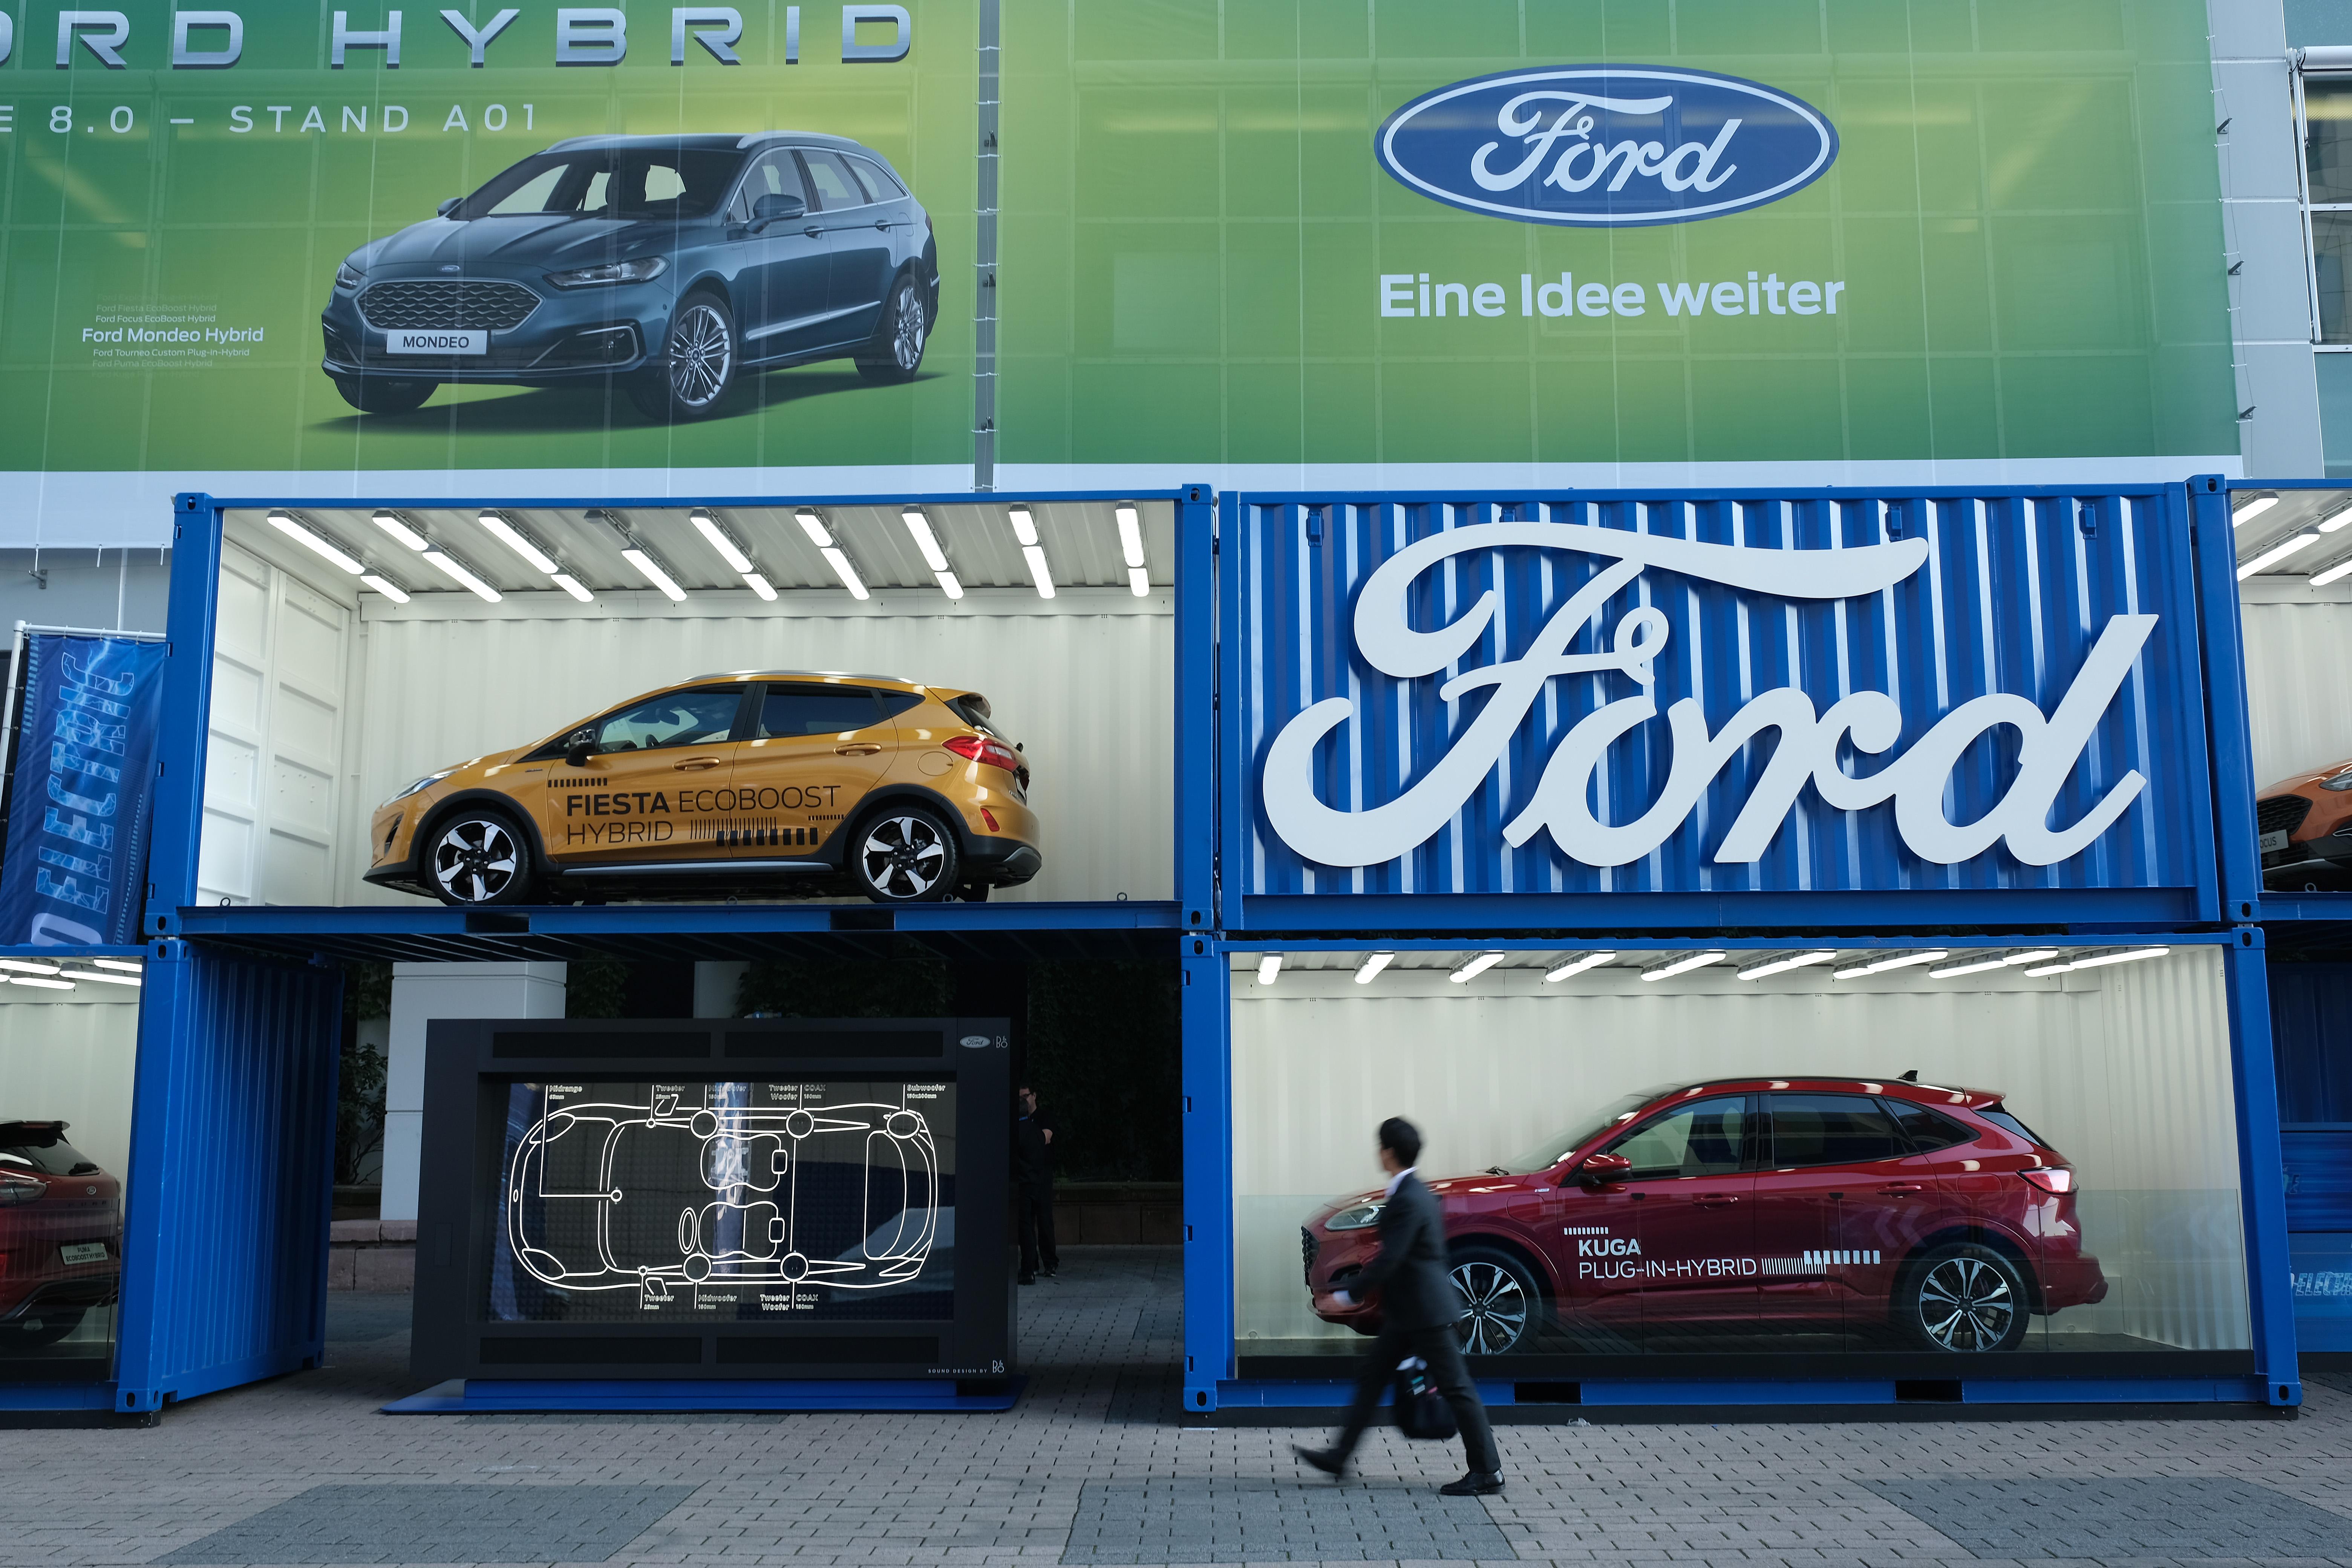 Why Is Ford Stock So Low?